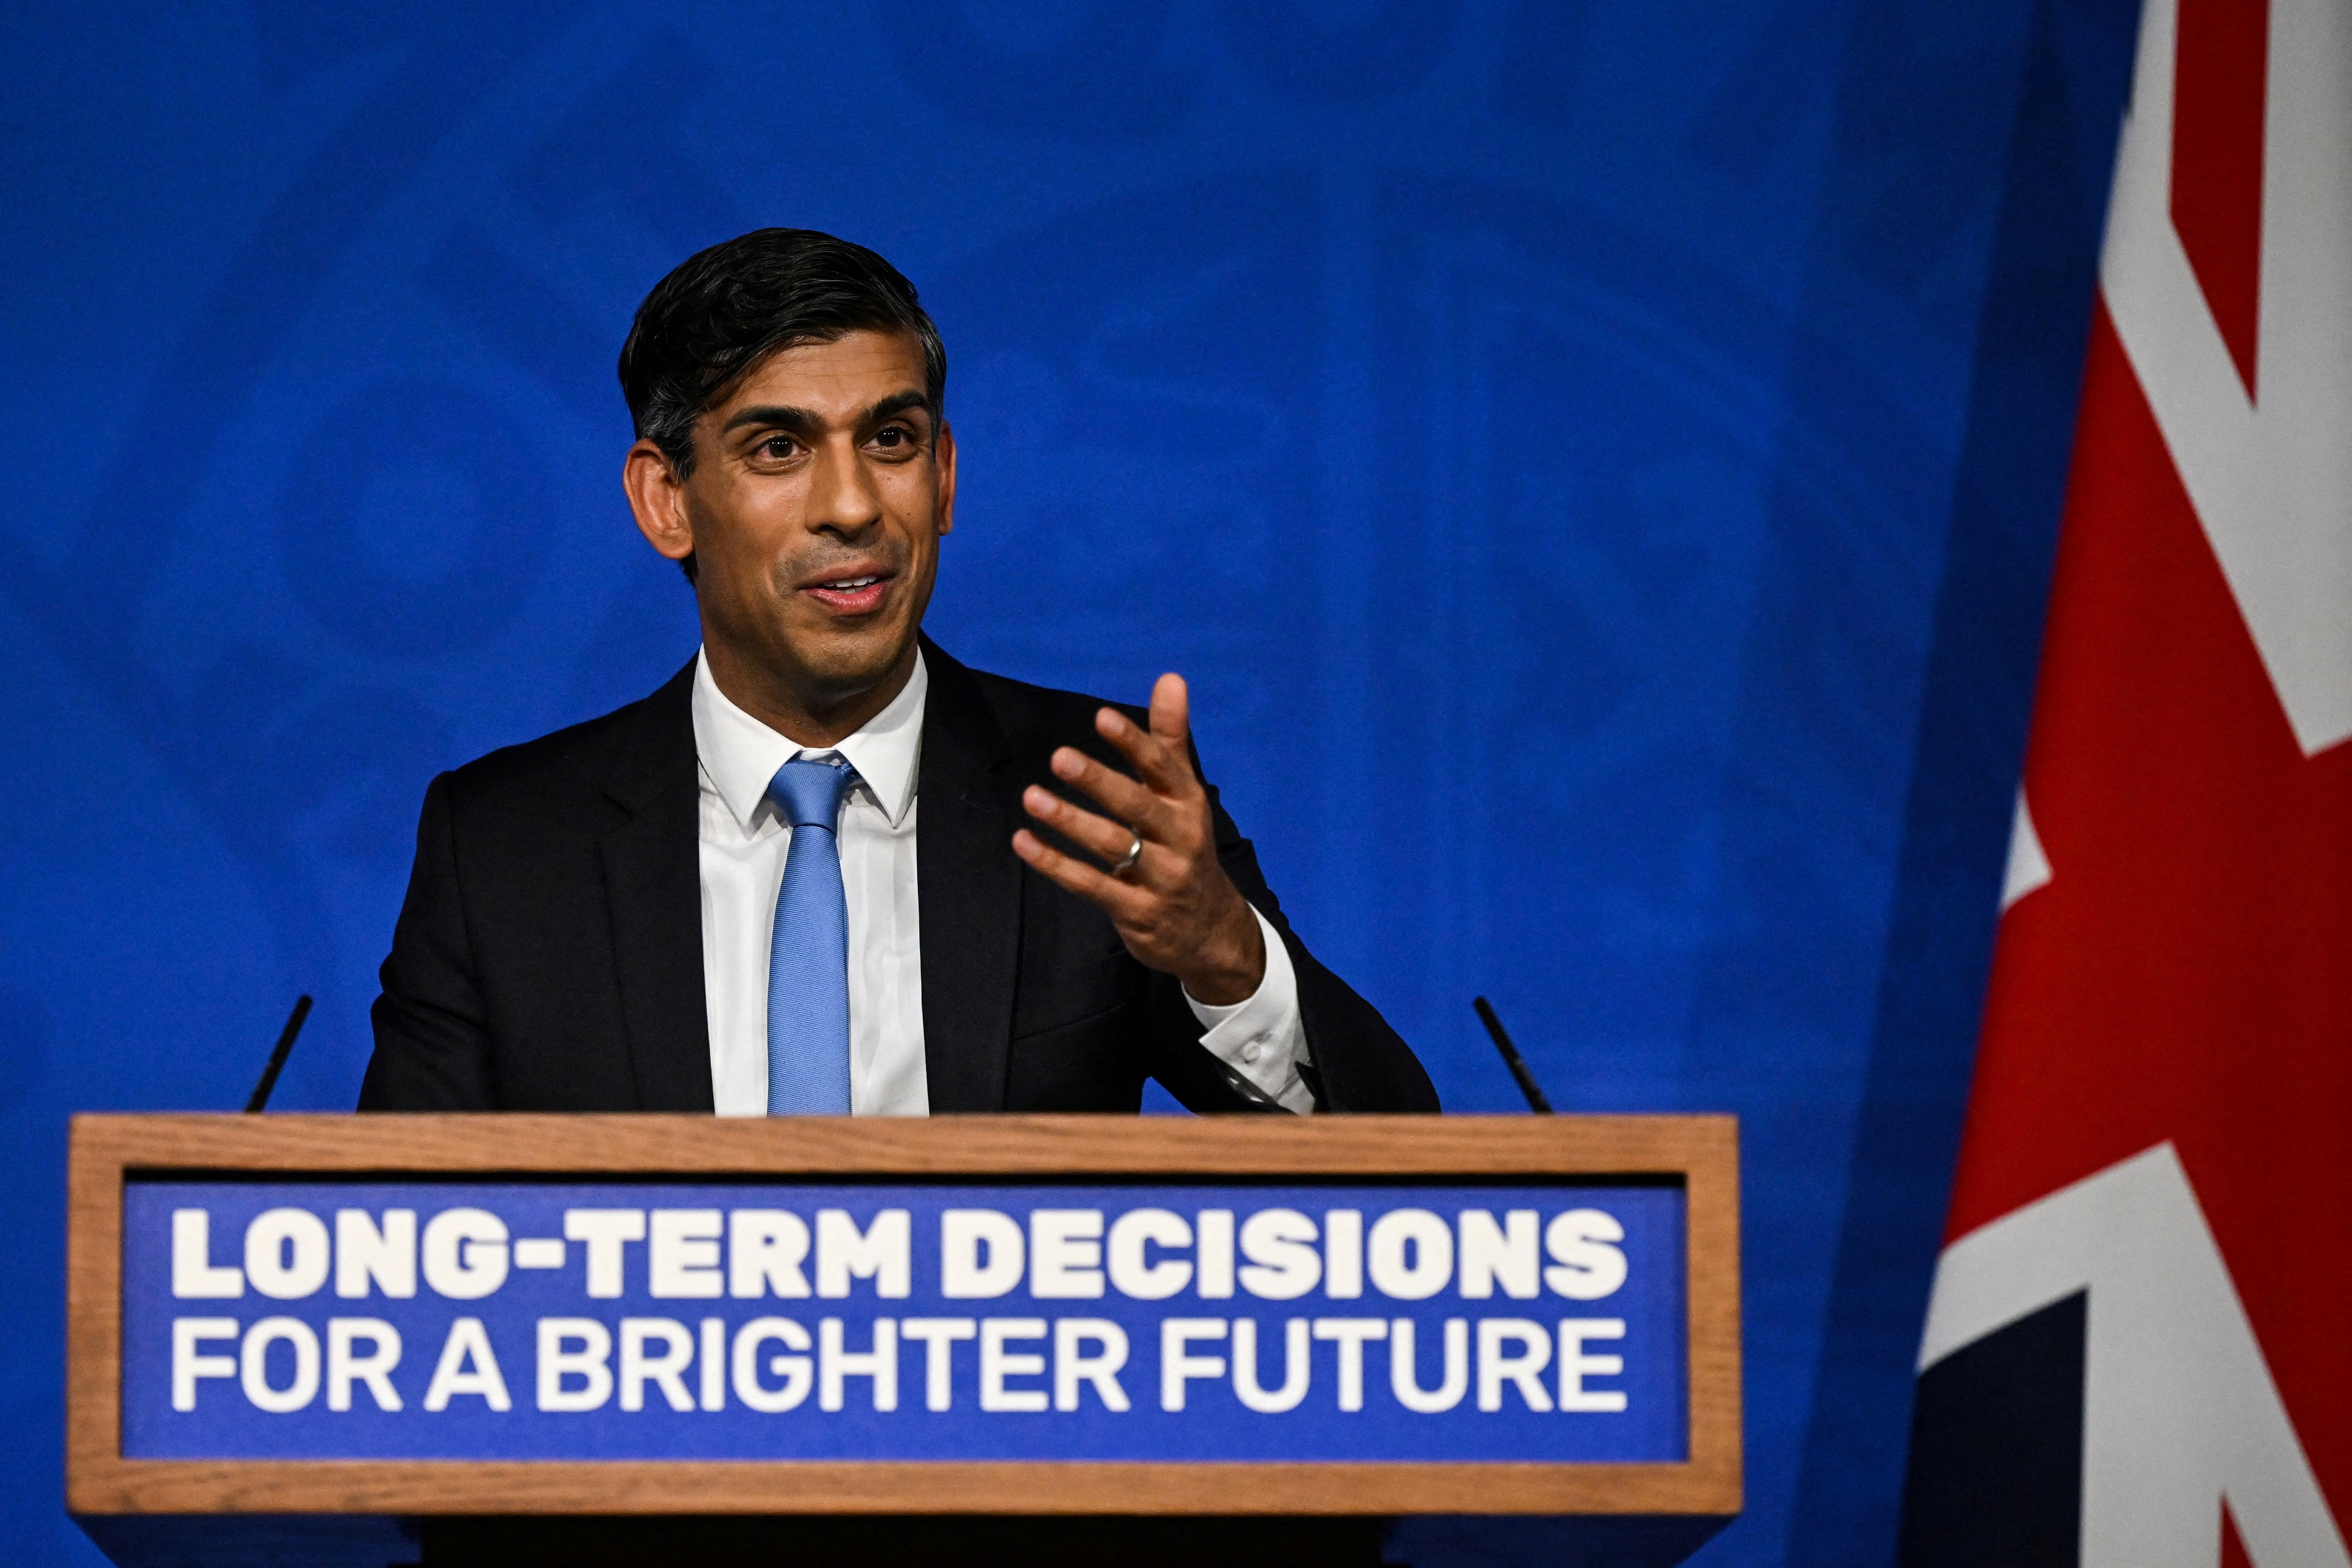 Britain's Prime Minister Rishi Sunak delivers a speech during a press conference on the net zero target, at the Downing Street Briefing Room